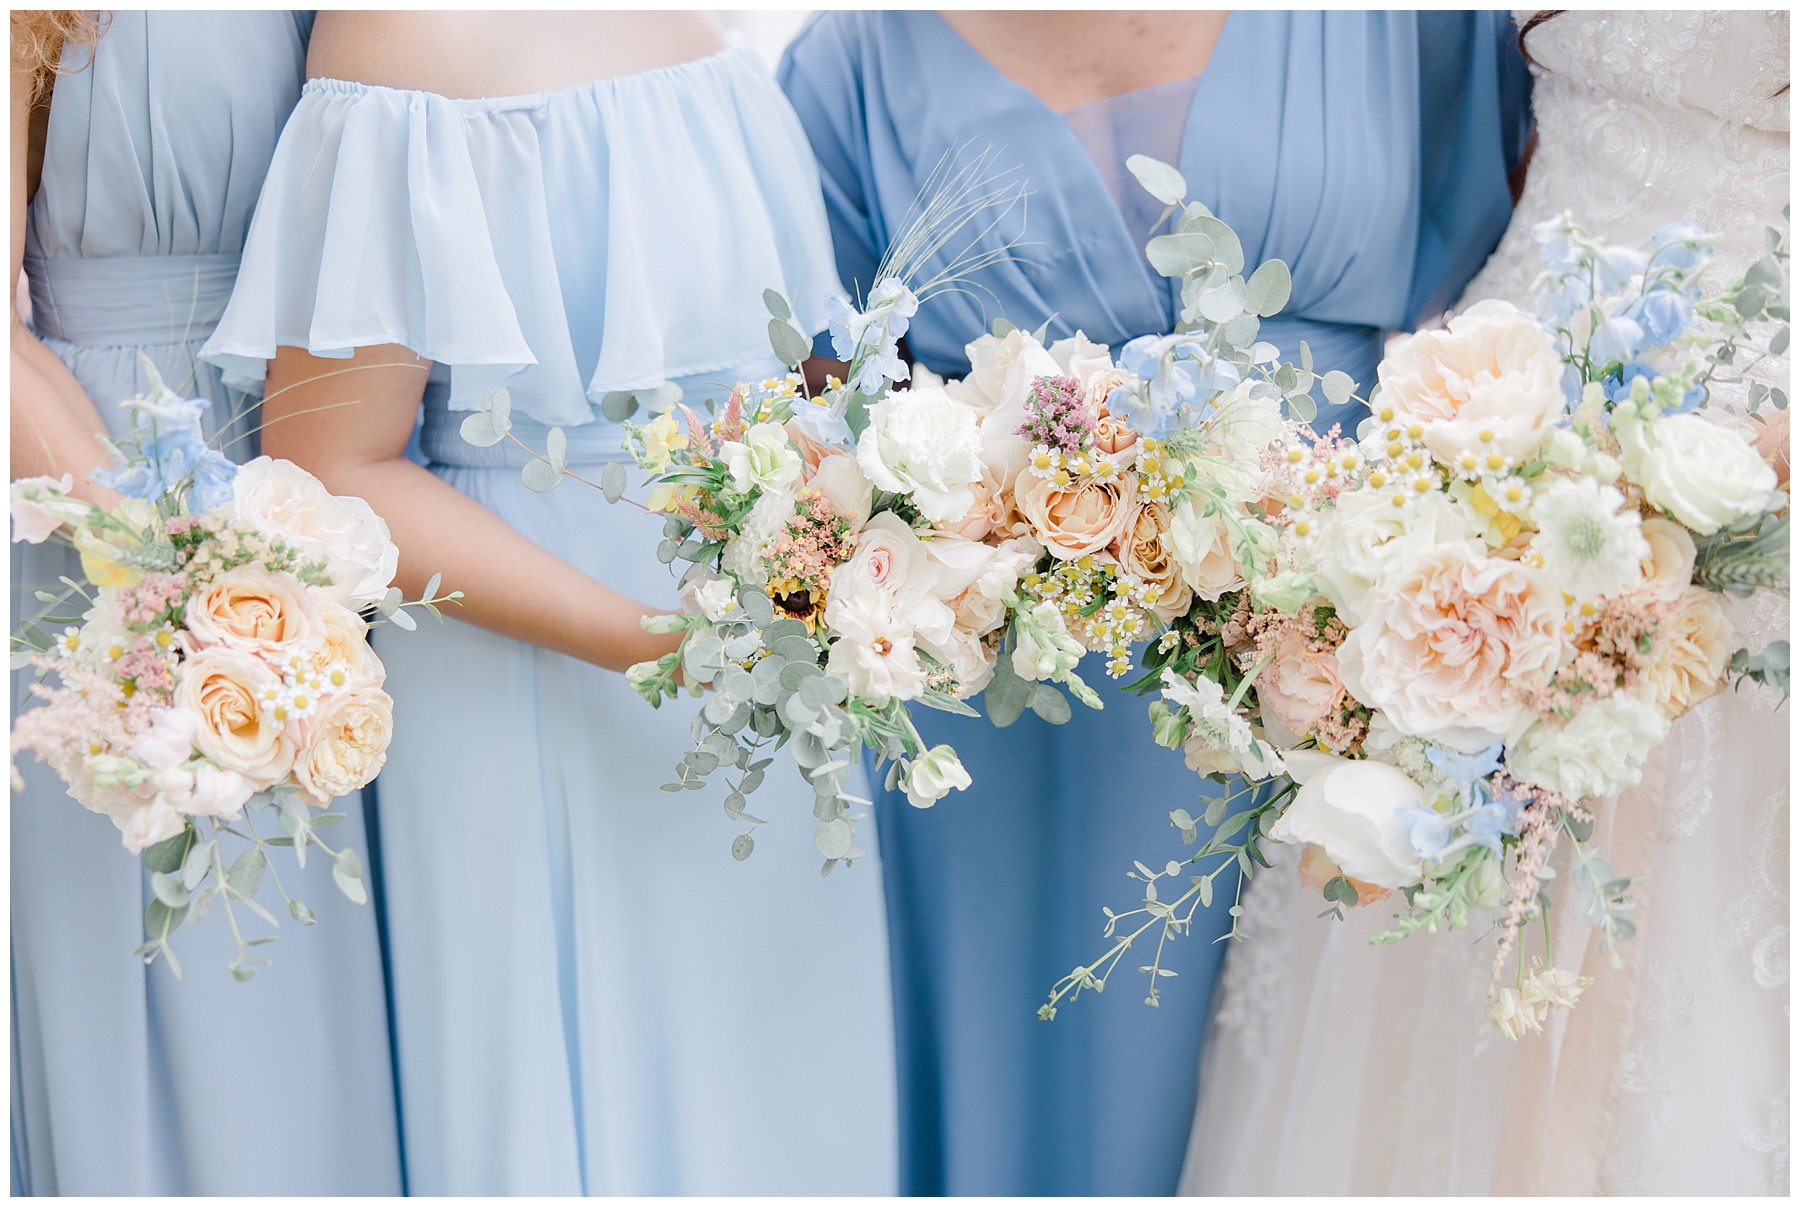 elegant wedding flower bouquets in shades of white, cream, and peach